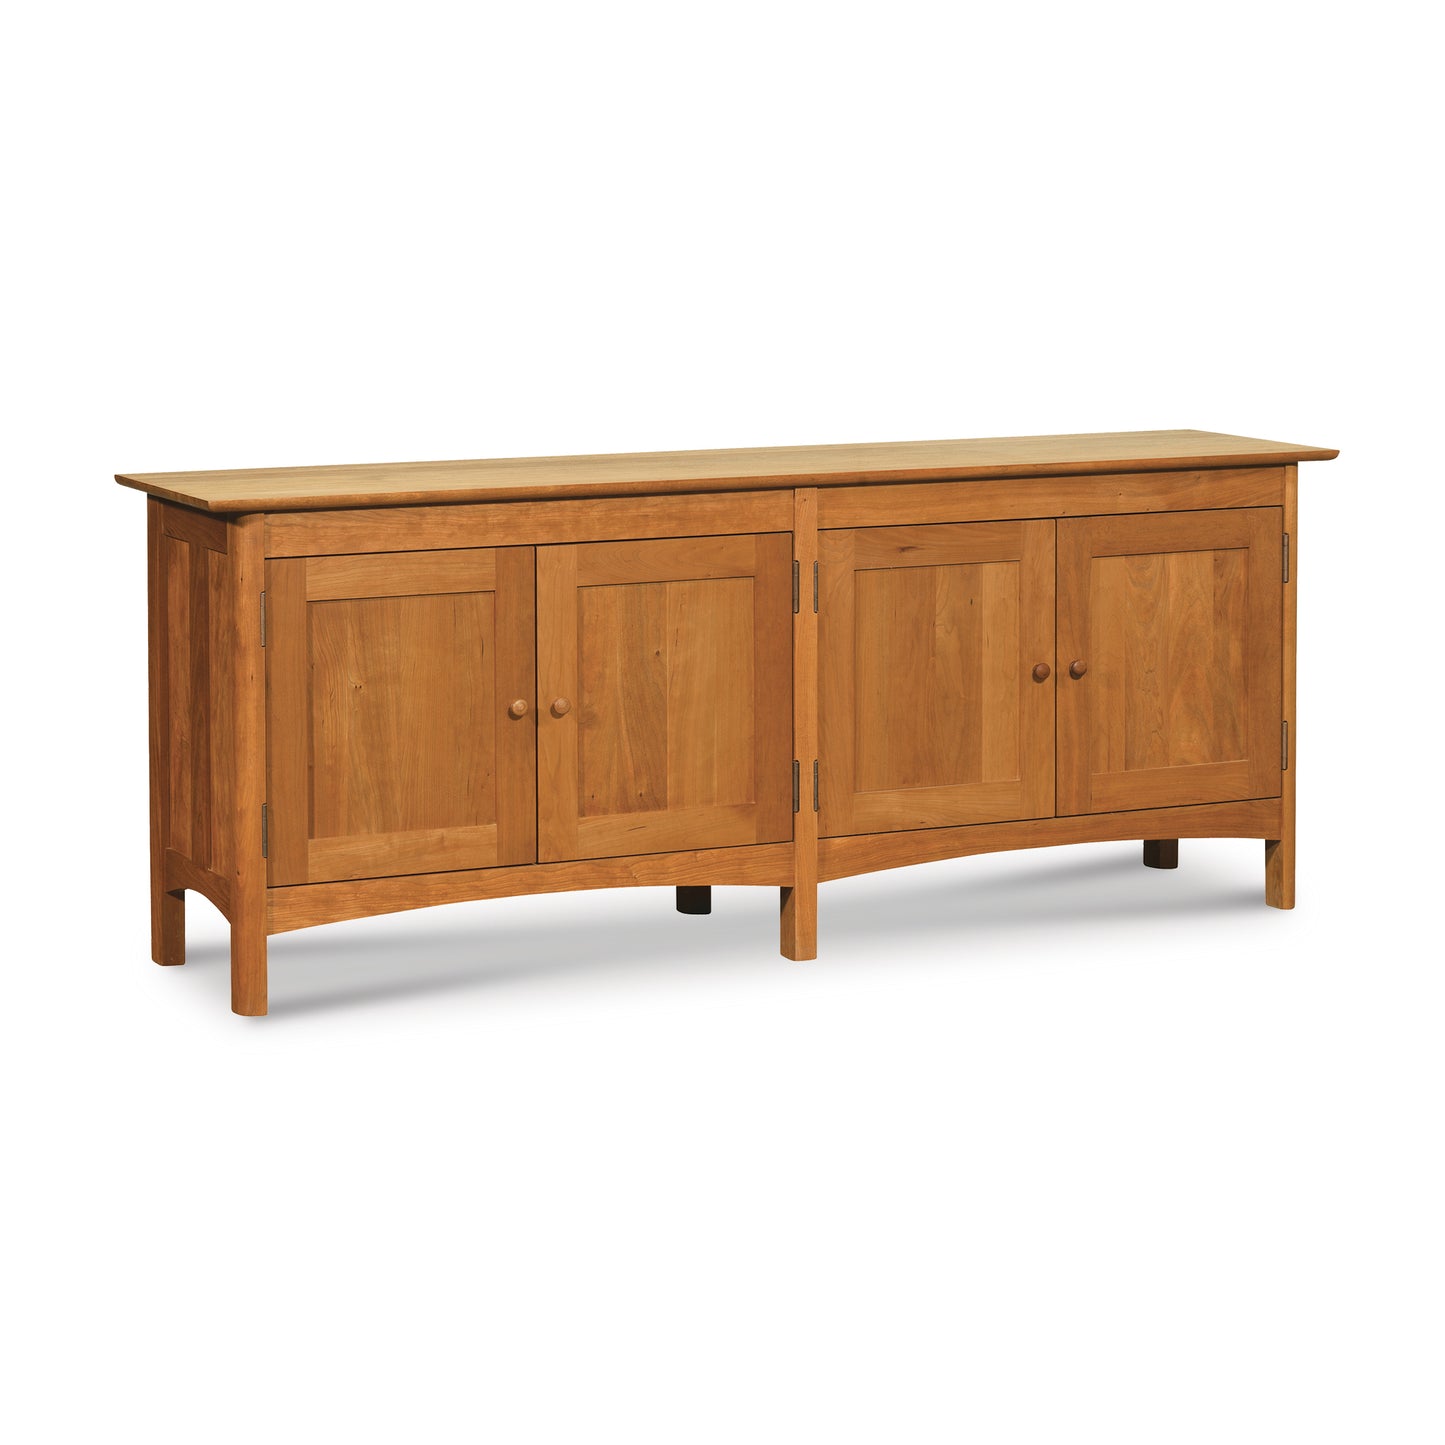 This Heartwood Shaker 4-Door Console Bookcase by Vermont Furniture Designs features two doors and two drawers, perfect for storing your items.